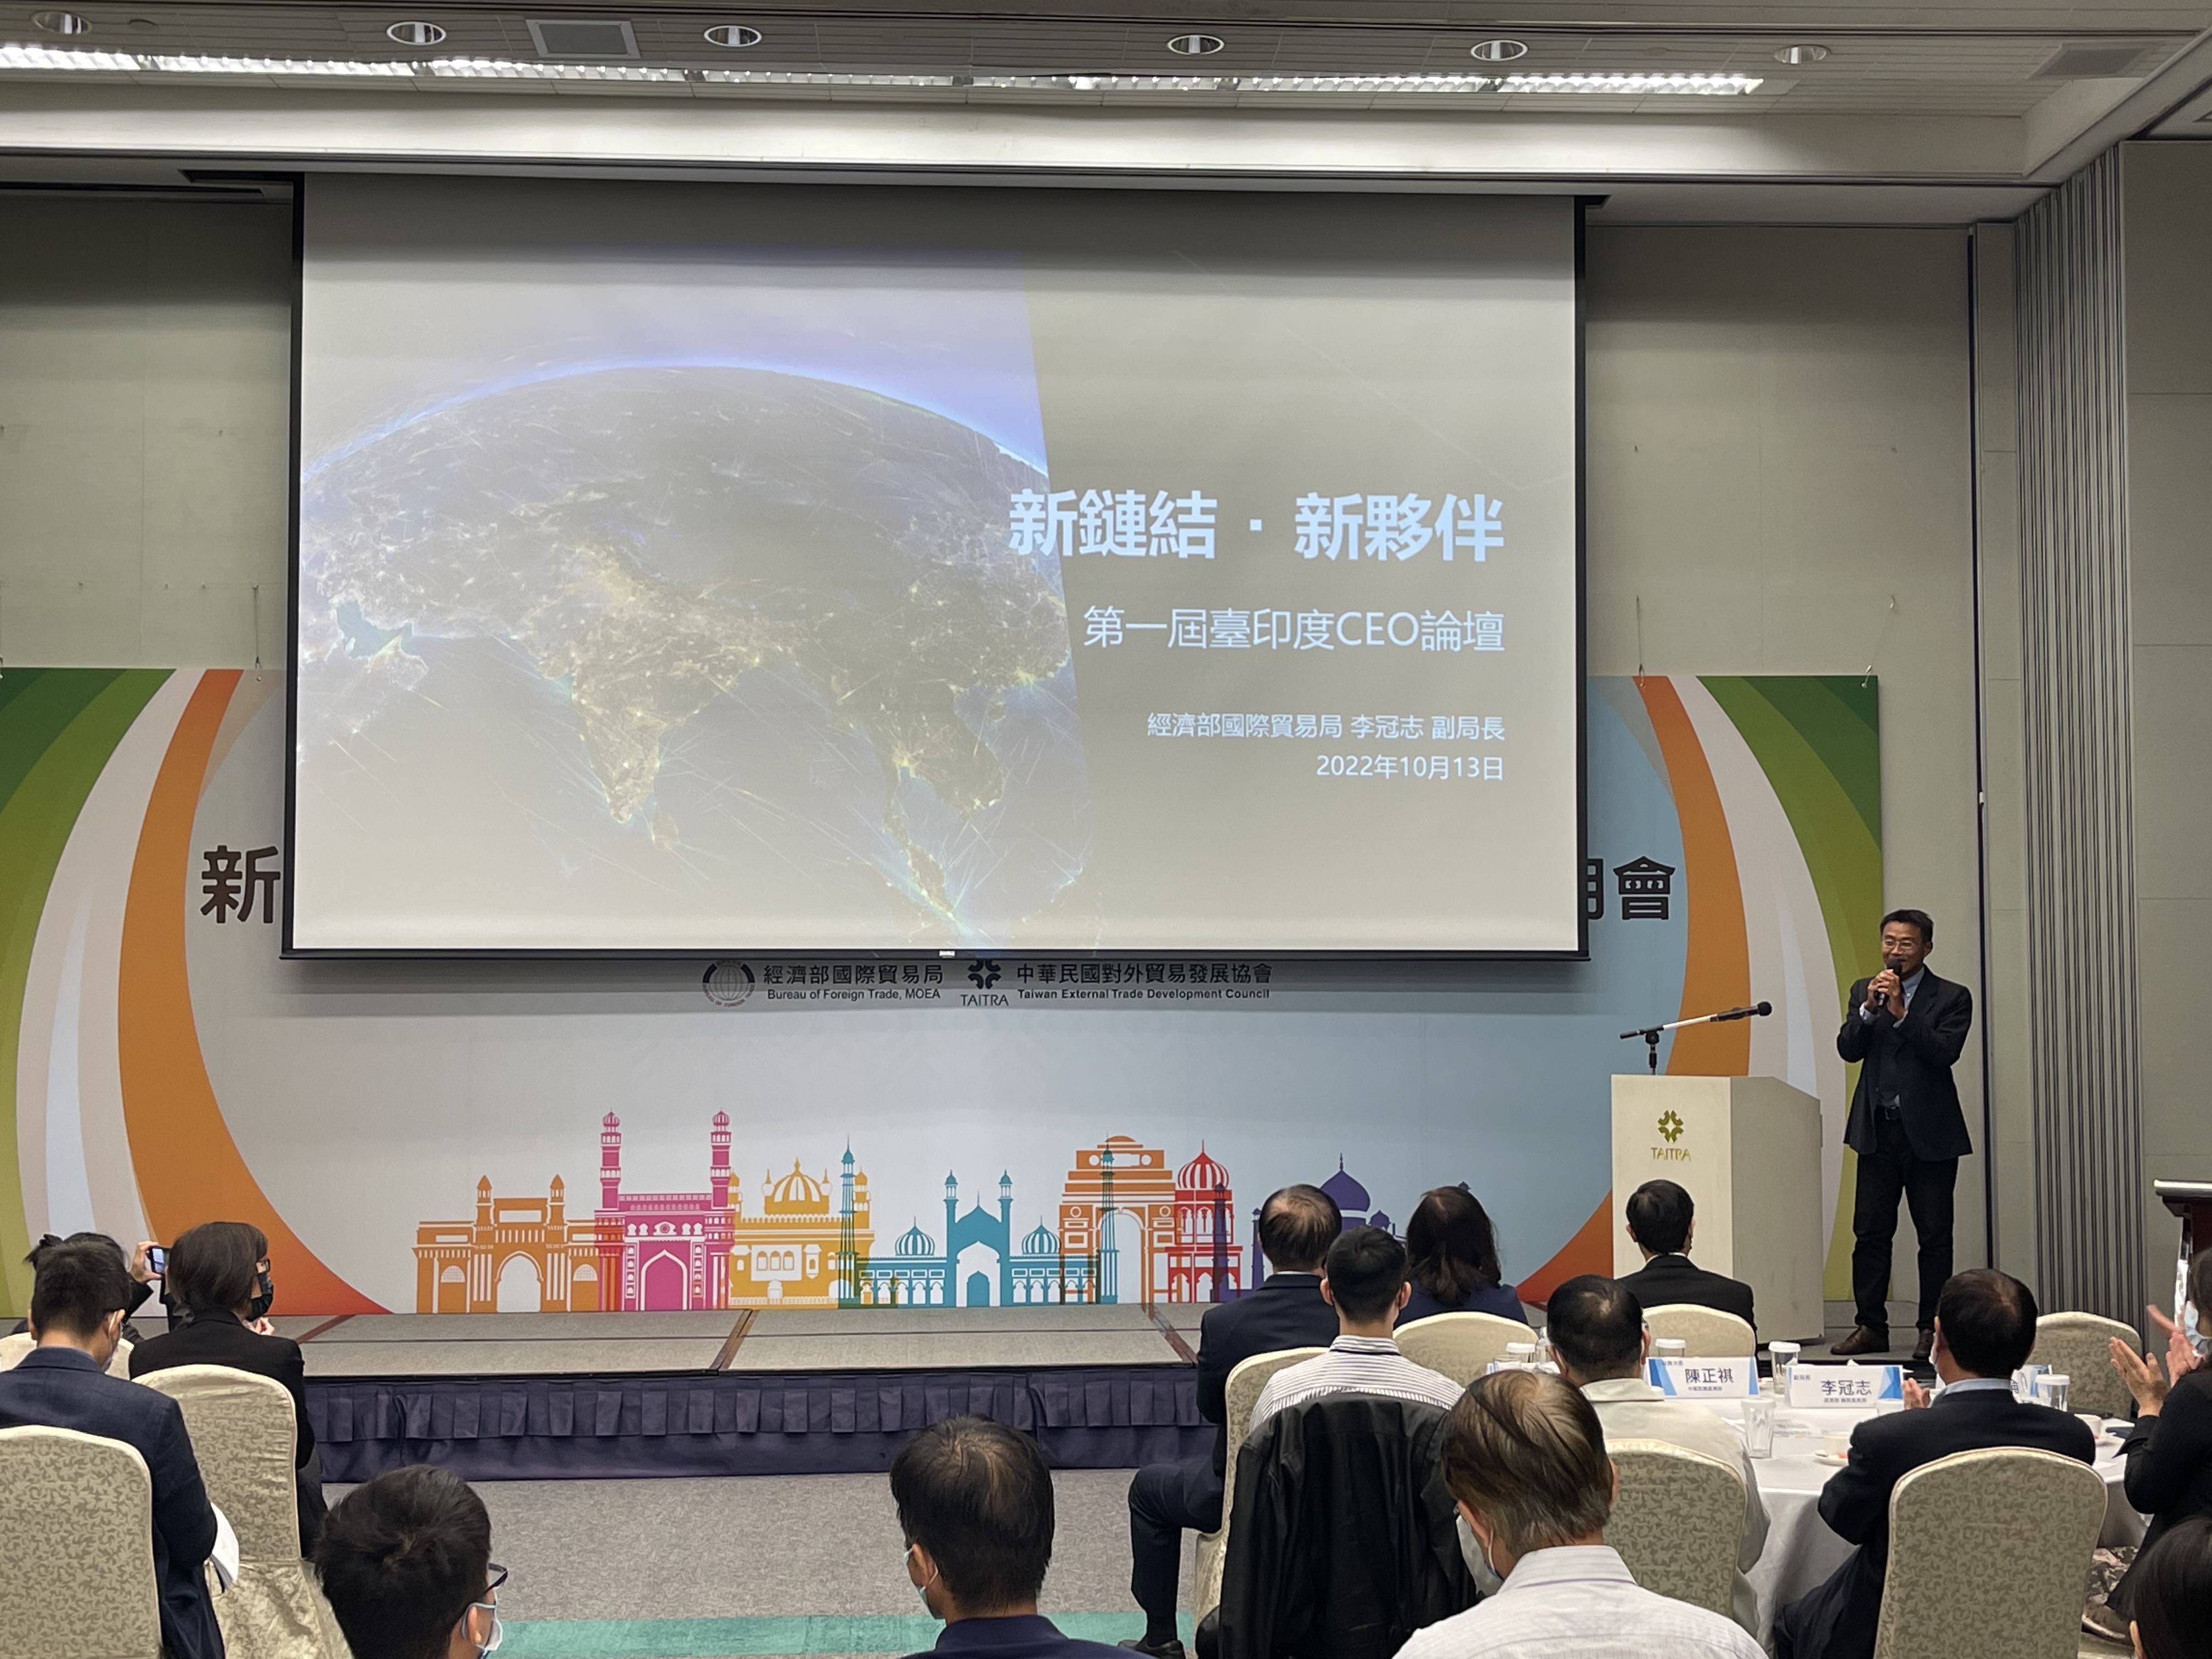 BOFT DDG Lee attended the 1st Taiwan-India CEO Forum Briefing